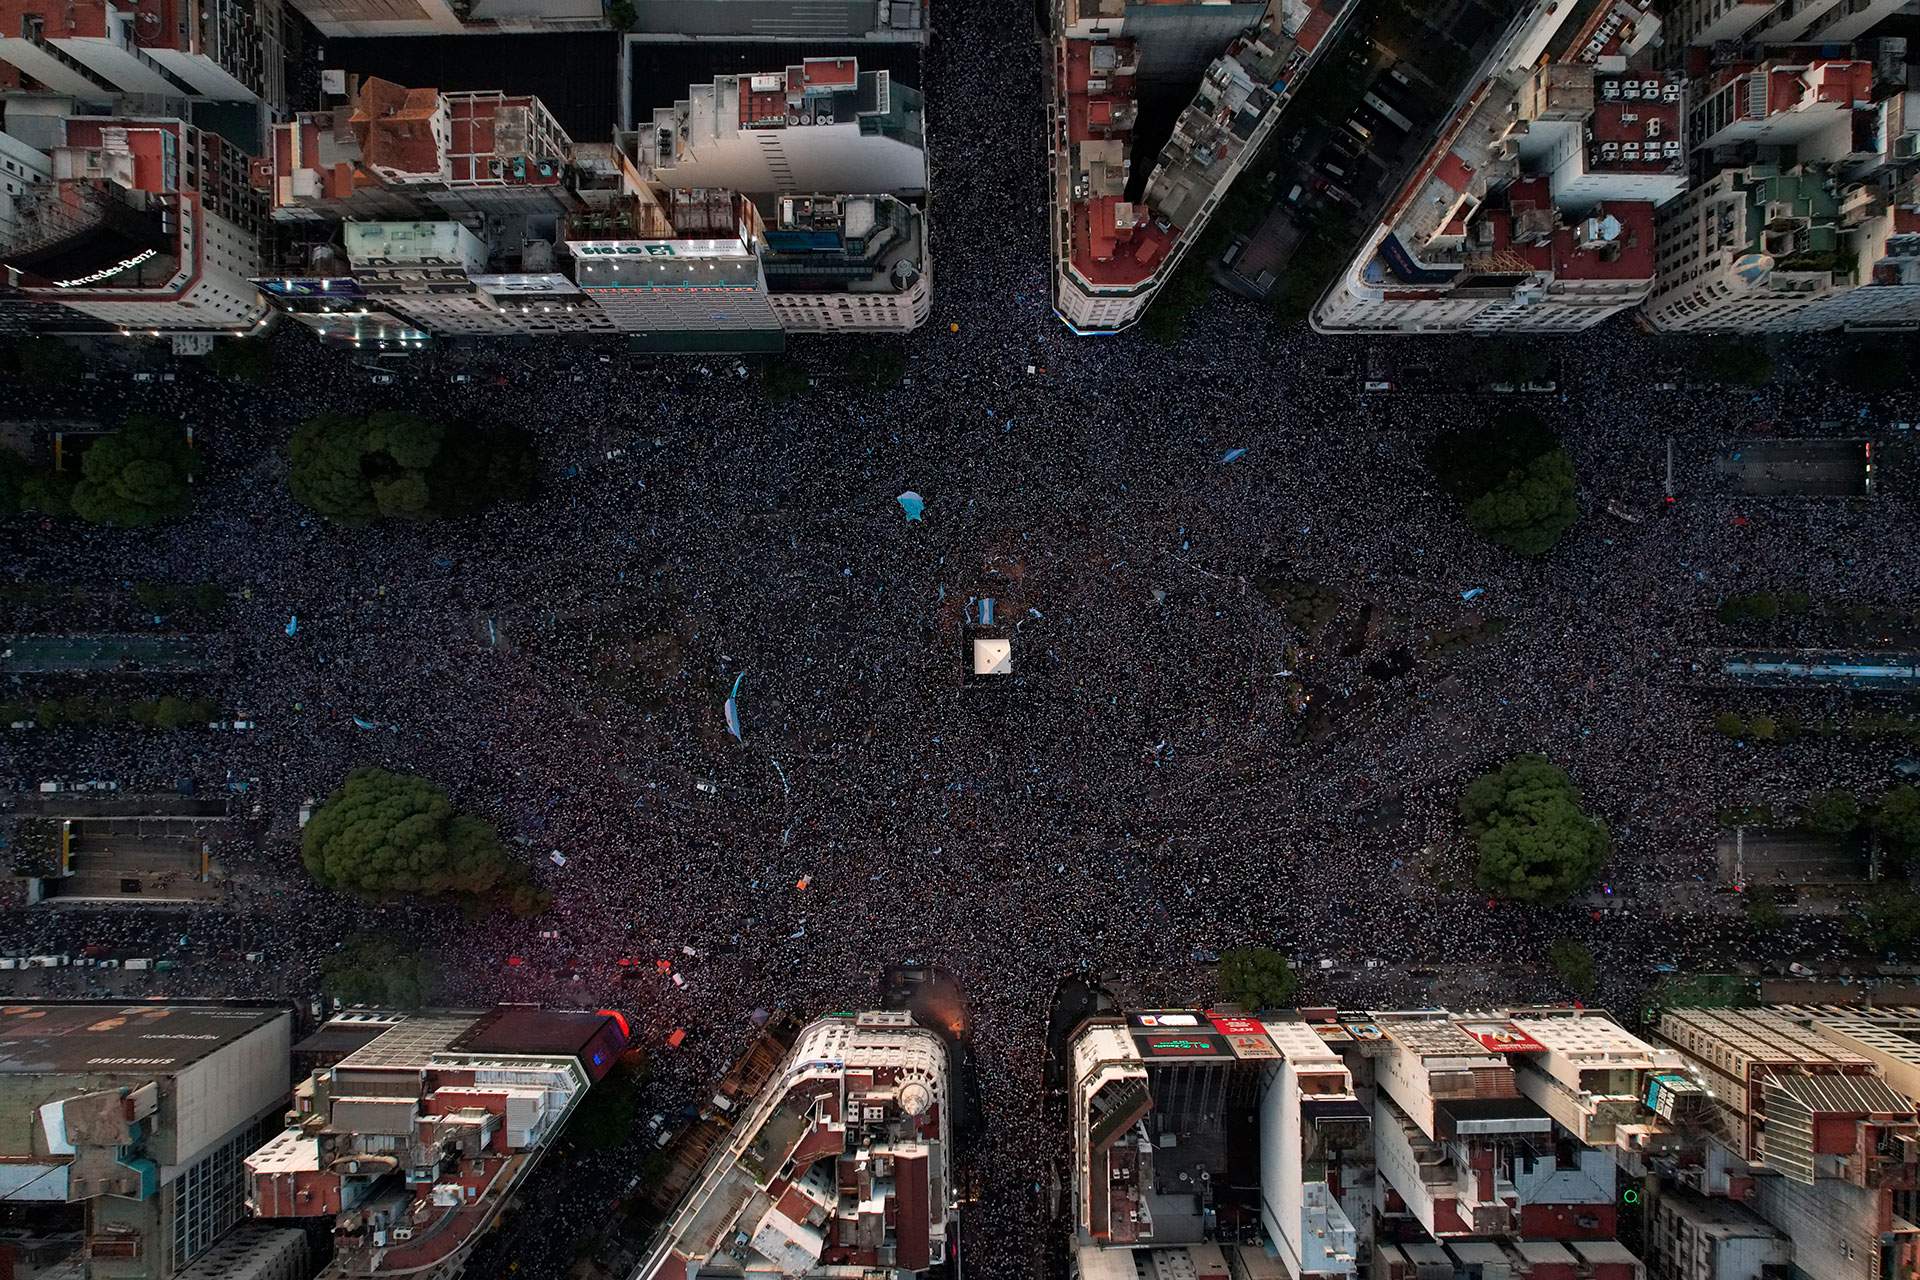 In this aerial view fans of Argentina celebrate winning the Qatar 2022 World Cup against France at the Obelisk in Buenos Aires, on December 18, 2022. (Photo by Emiliano LASALVIA / AFP)